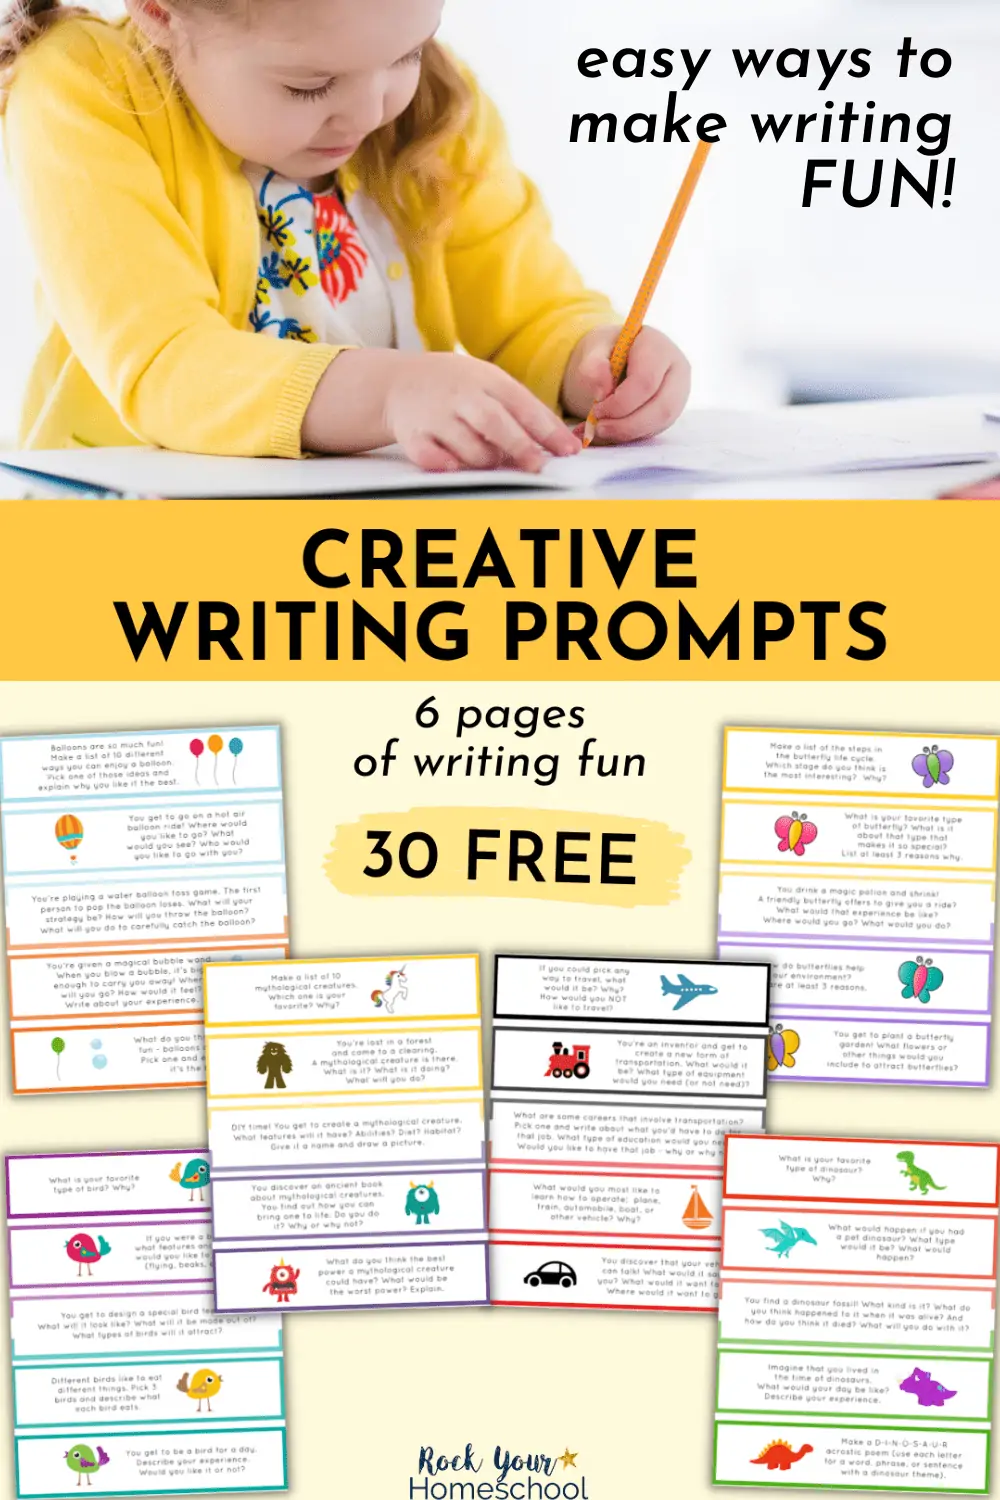 30 Free Printable Writing Prompts for Kids with a Variety of Creative Themes